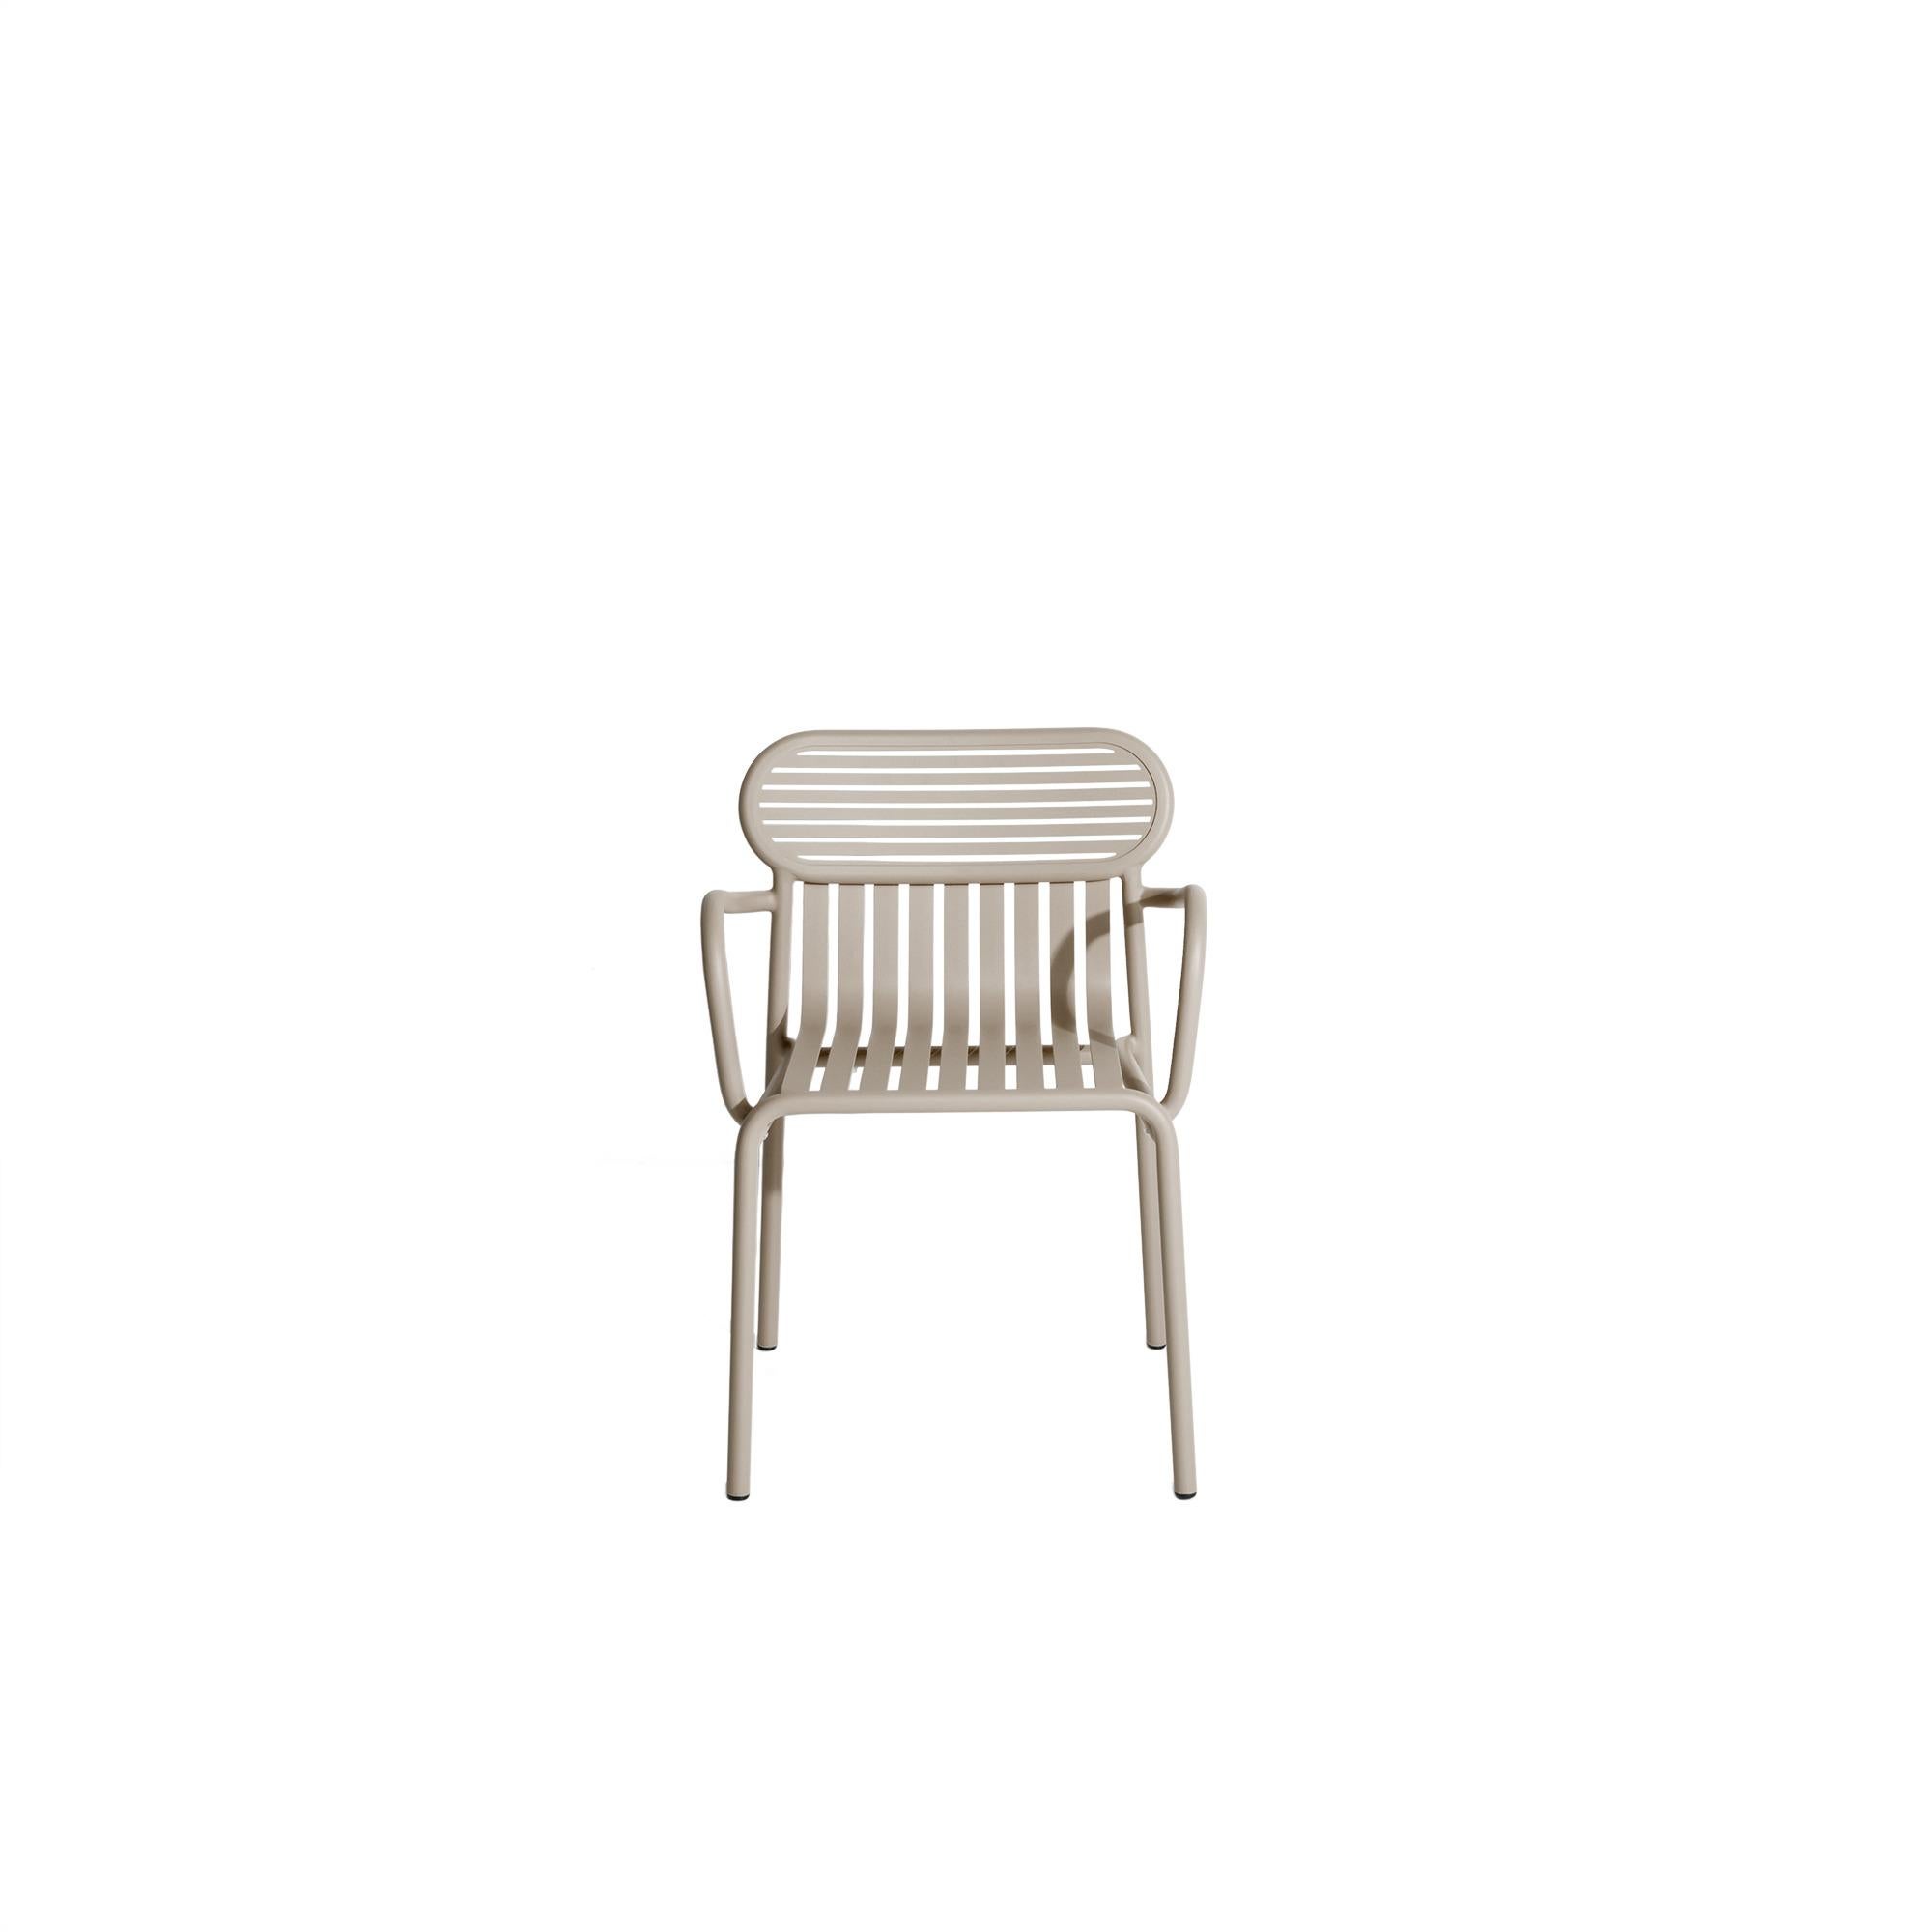 Petite Friture Week-End Bridge Chair in Dune Aluminium by Studio BrichetZiegler, 2017

The week-end collection is a full range of outdoor furniture, in aluminium grained epoxy paint, matt finish, that includes 18 functions and 8 colours for the